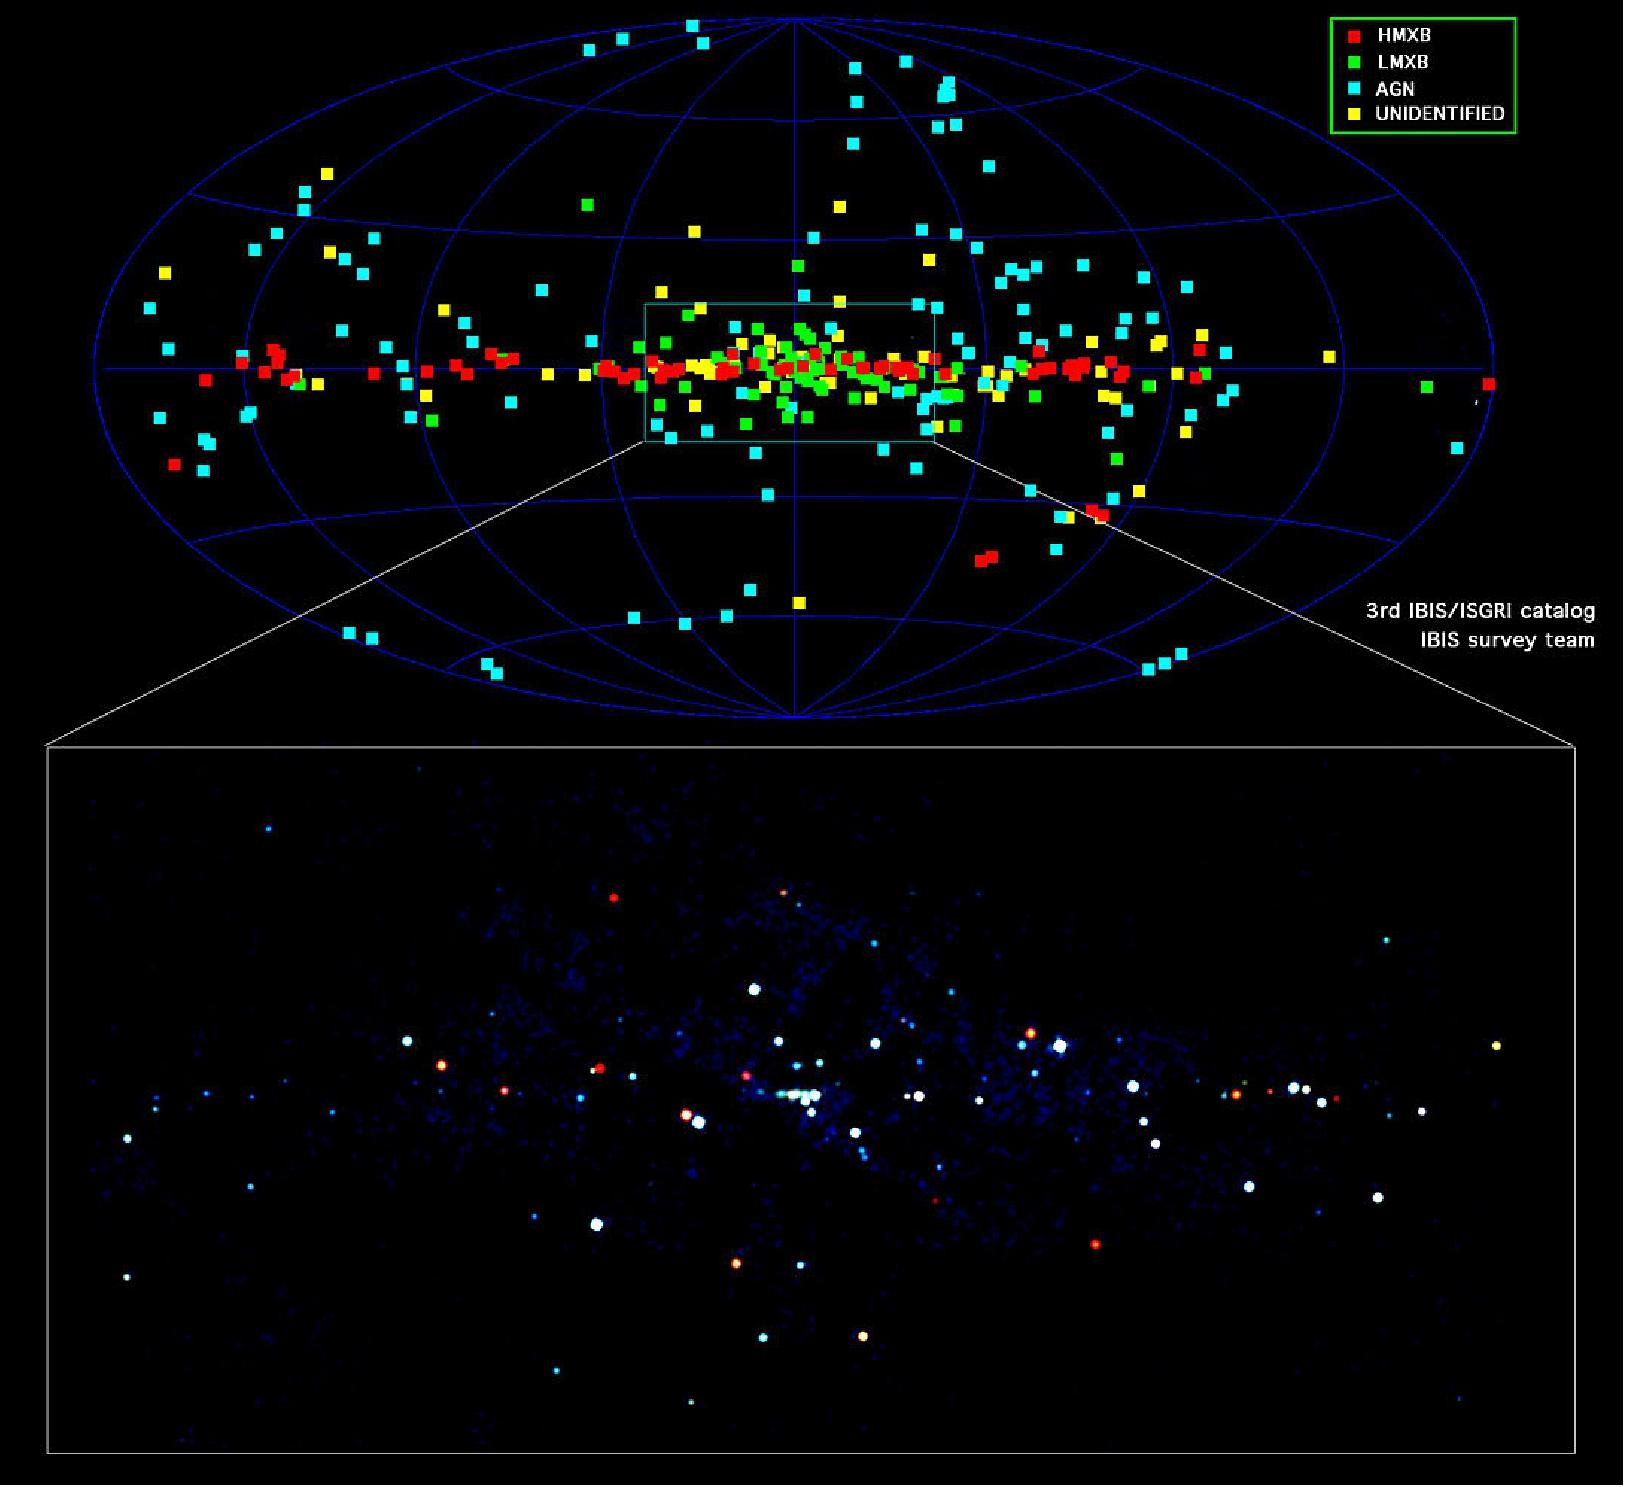 Figure 39: Densest objects seen by INTEGRAL. The red and green boxes represent dense objects discovered by INTEGRAL in our galaxy. The blue spots are supermassive black holes in the distant universe. The yellow spots are so-far unidentified sources of gamma-rays. Their distribution suggests that they are probably dense objects within the Milky Way (image credit: ESA/ IBIS Survey team (A Bird, et al.))